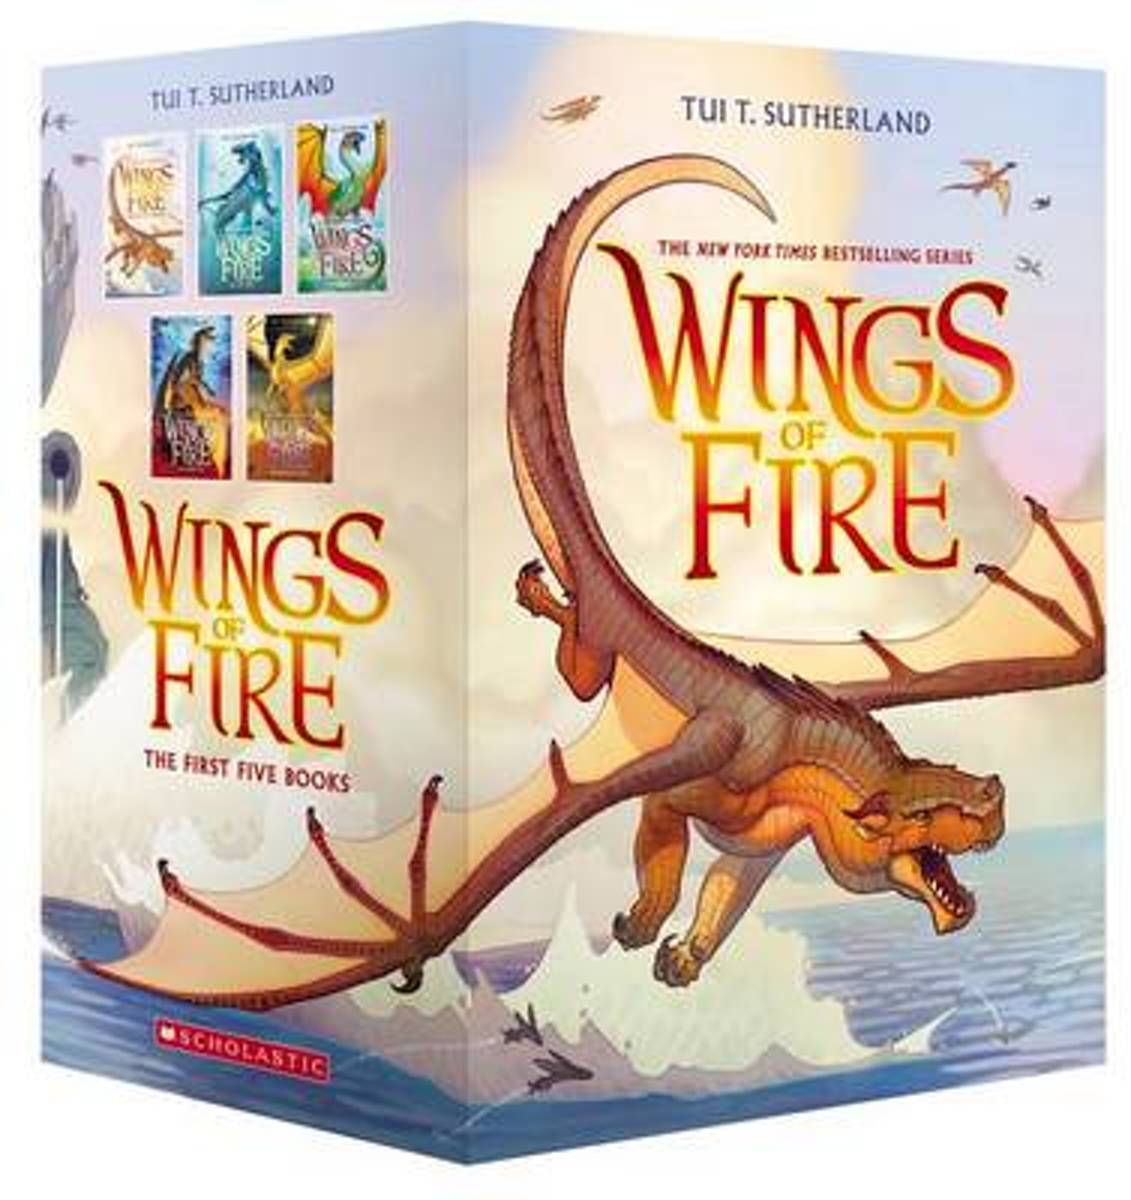 book review of wings of fire in 200 words